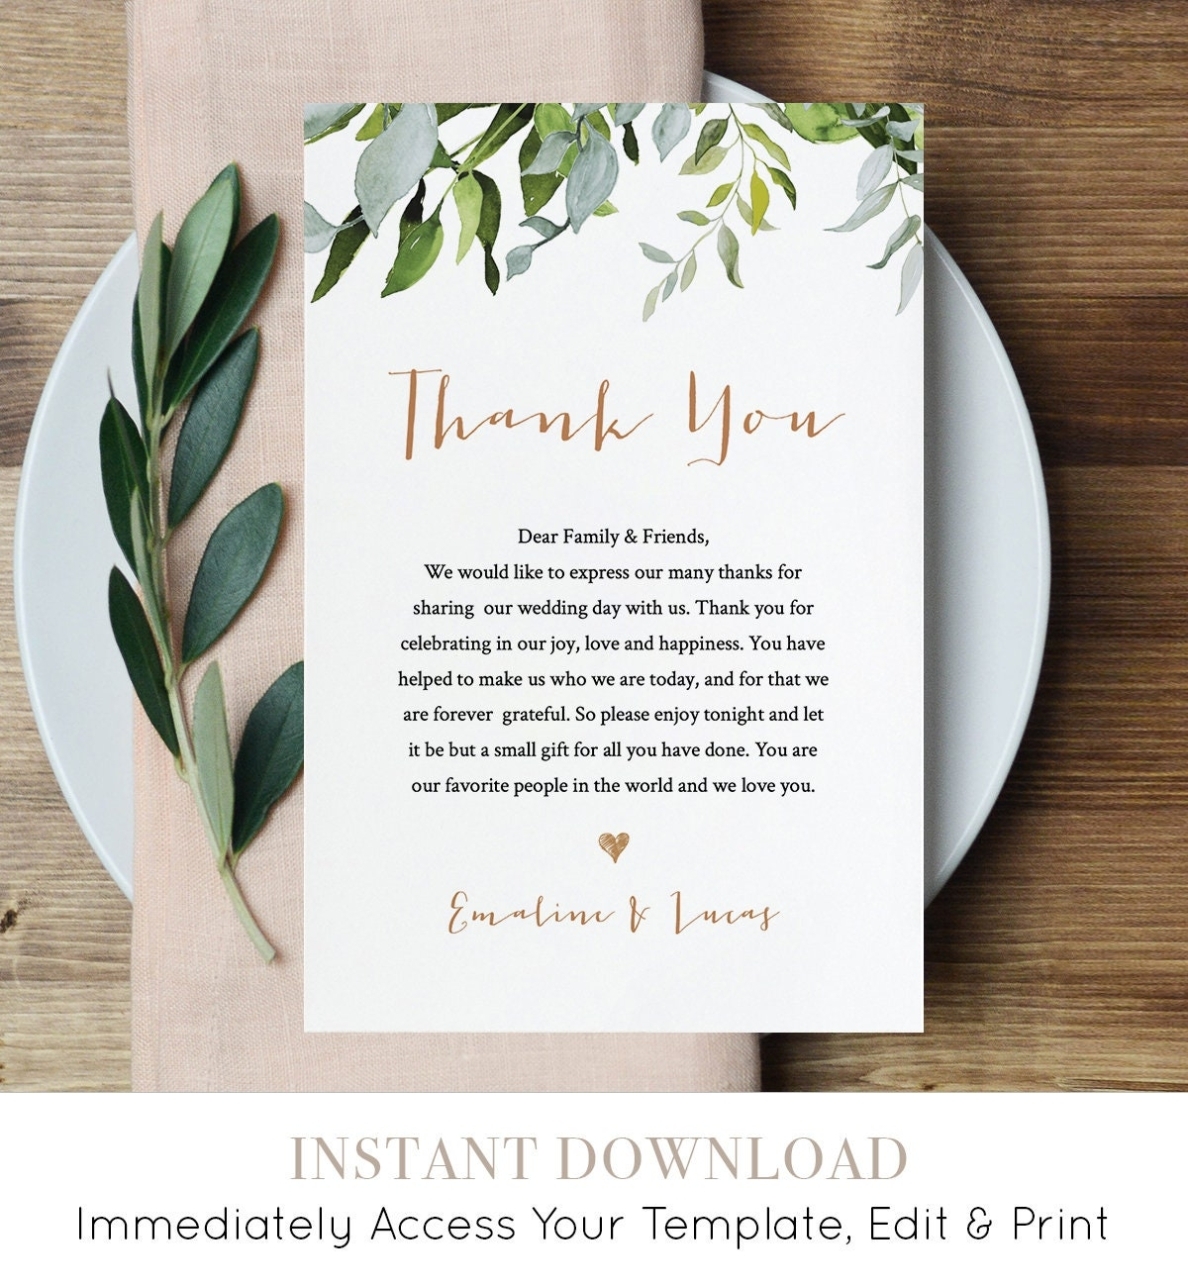 Thank You Letter Template, Wedding Reception Thank You Note, Instant Pertaining To Thank You Notes Templates